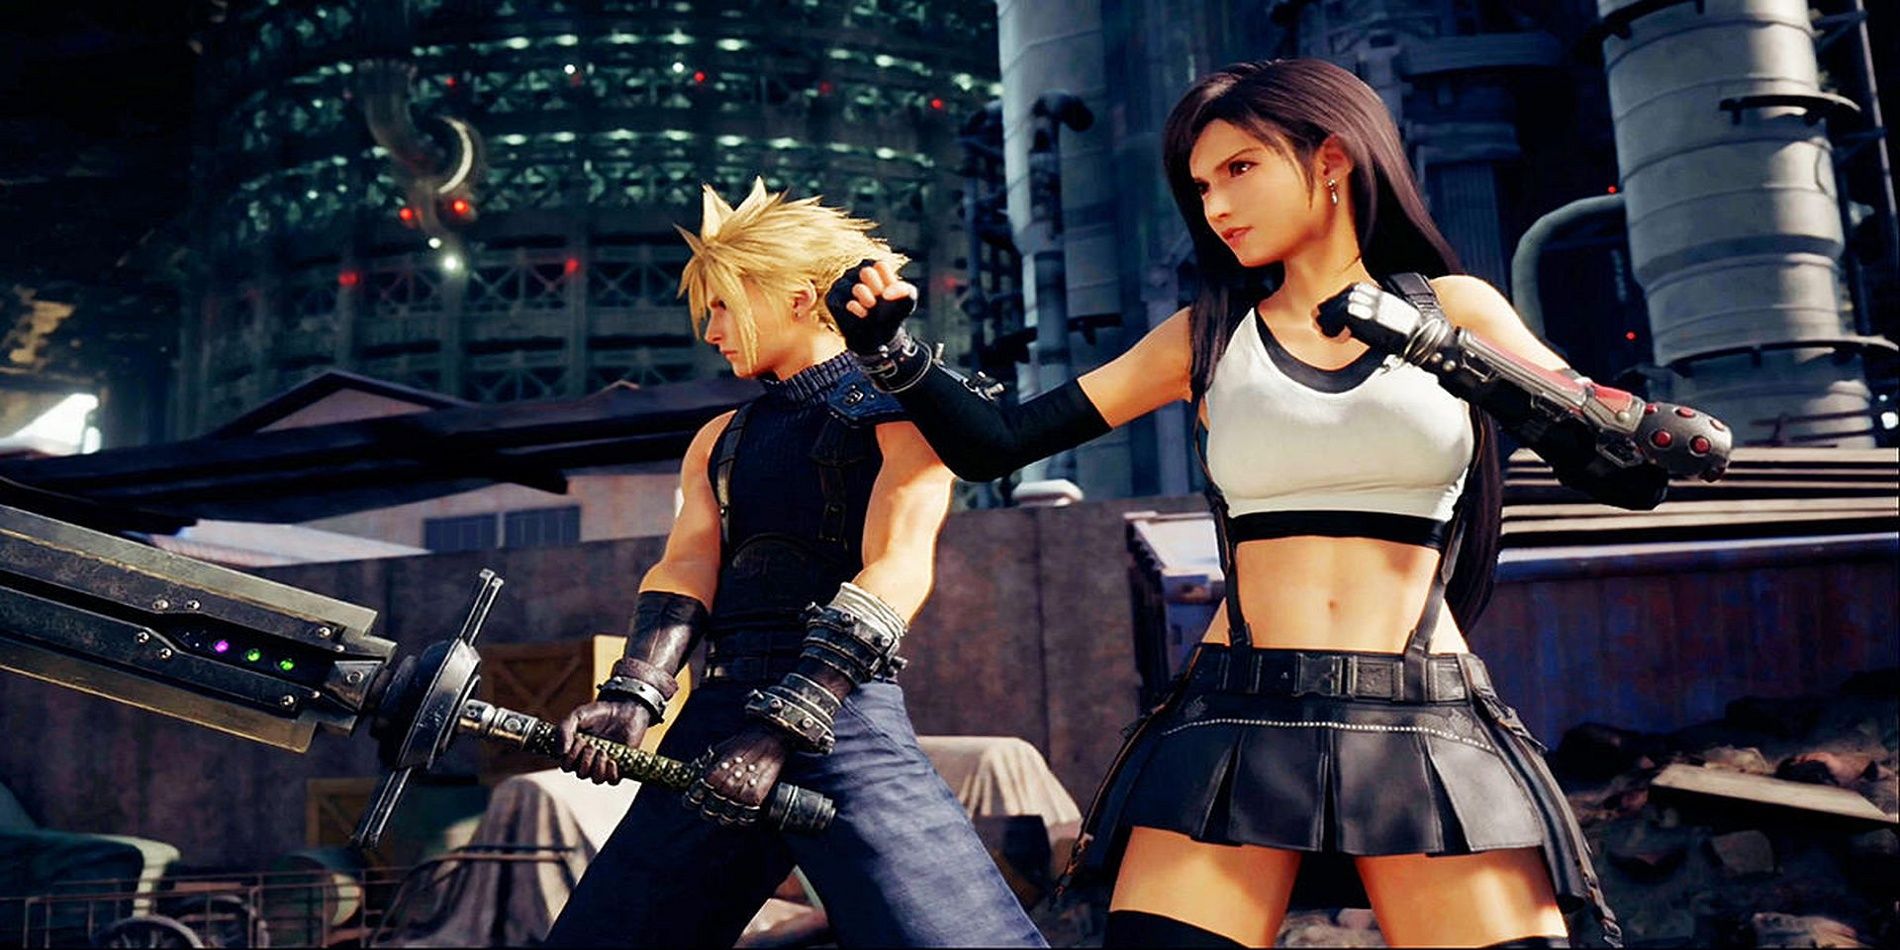 Cloud and Tifa ready themselves for a fight in the Final Fantasy 7 remake